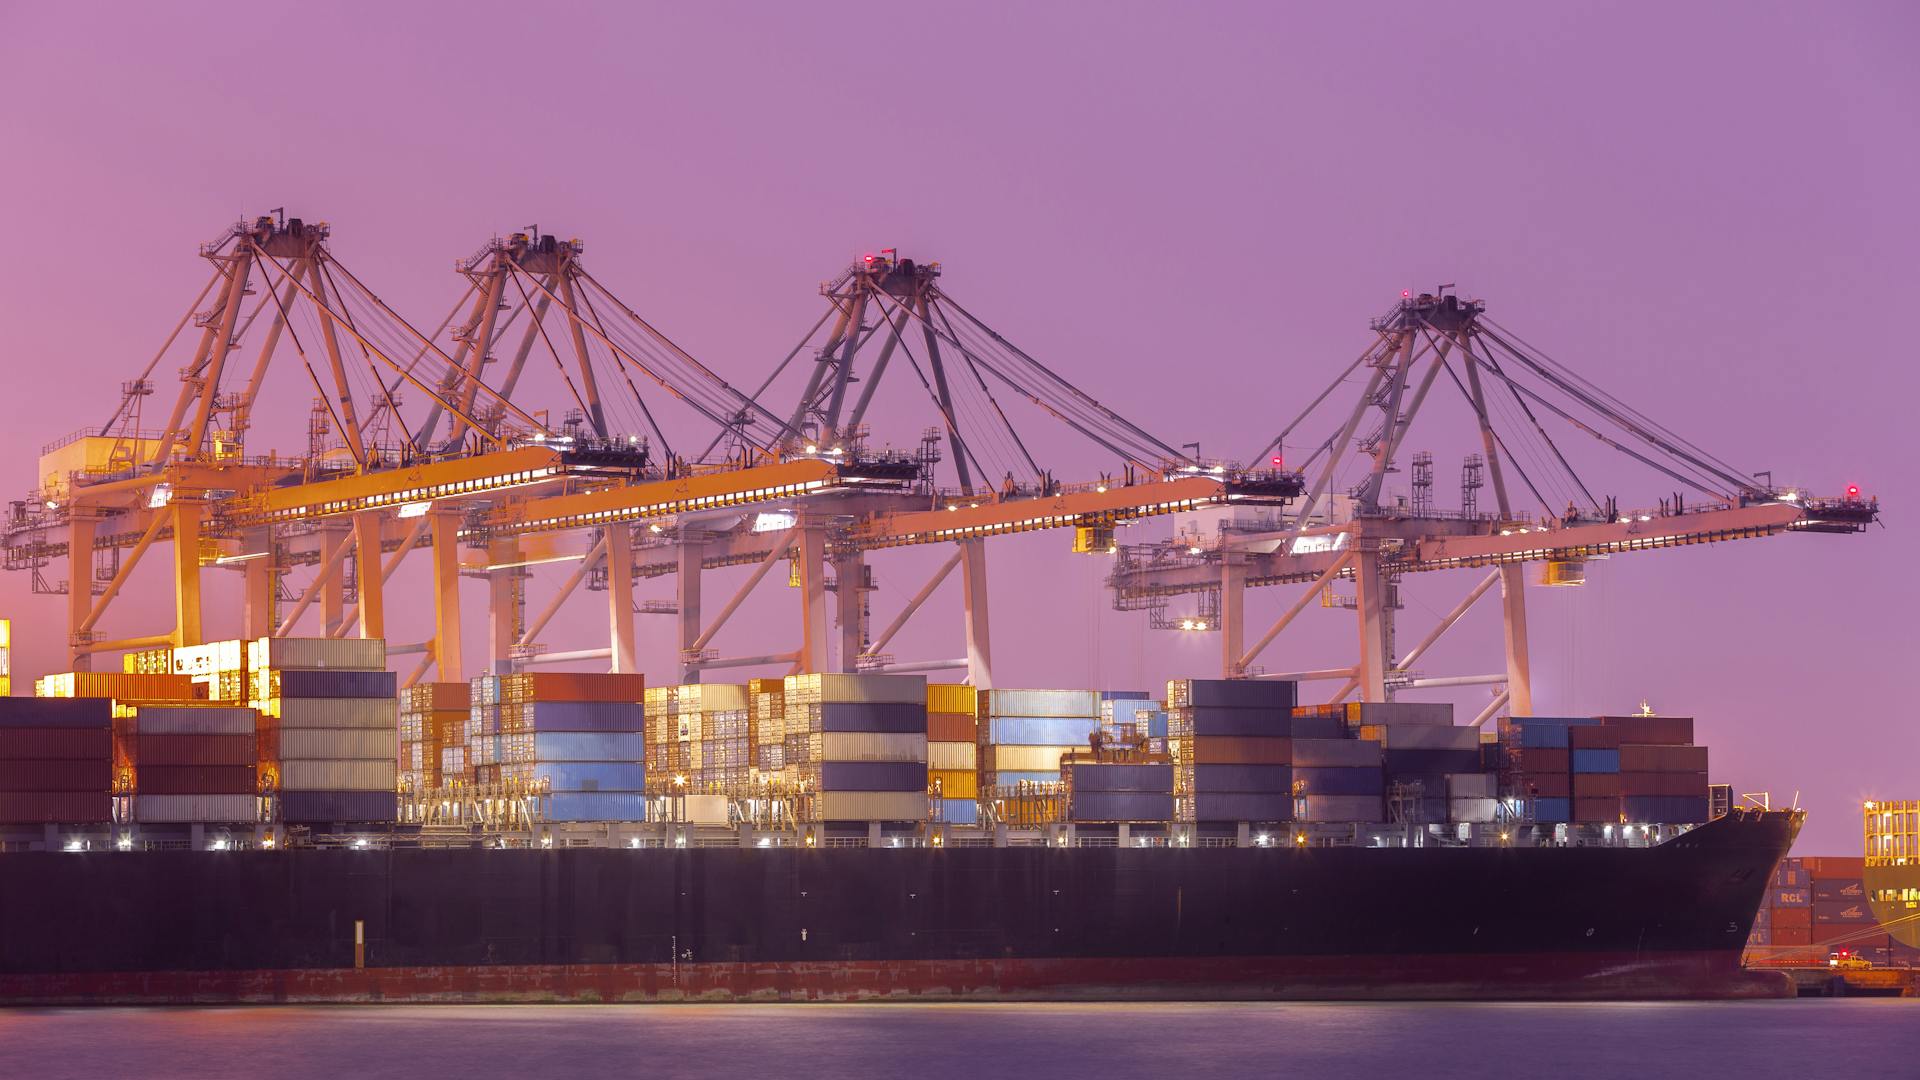 Container terminal operators face an escalation of speed and volume every day, pushing them to find an even more manageable and adept regulatory systems approach.